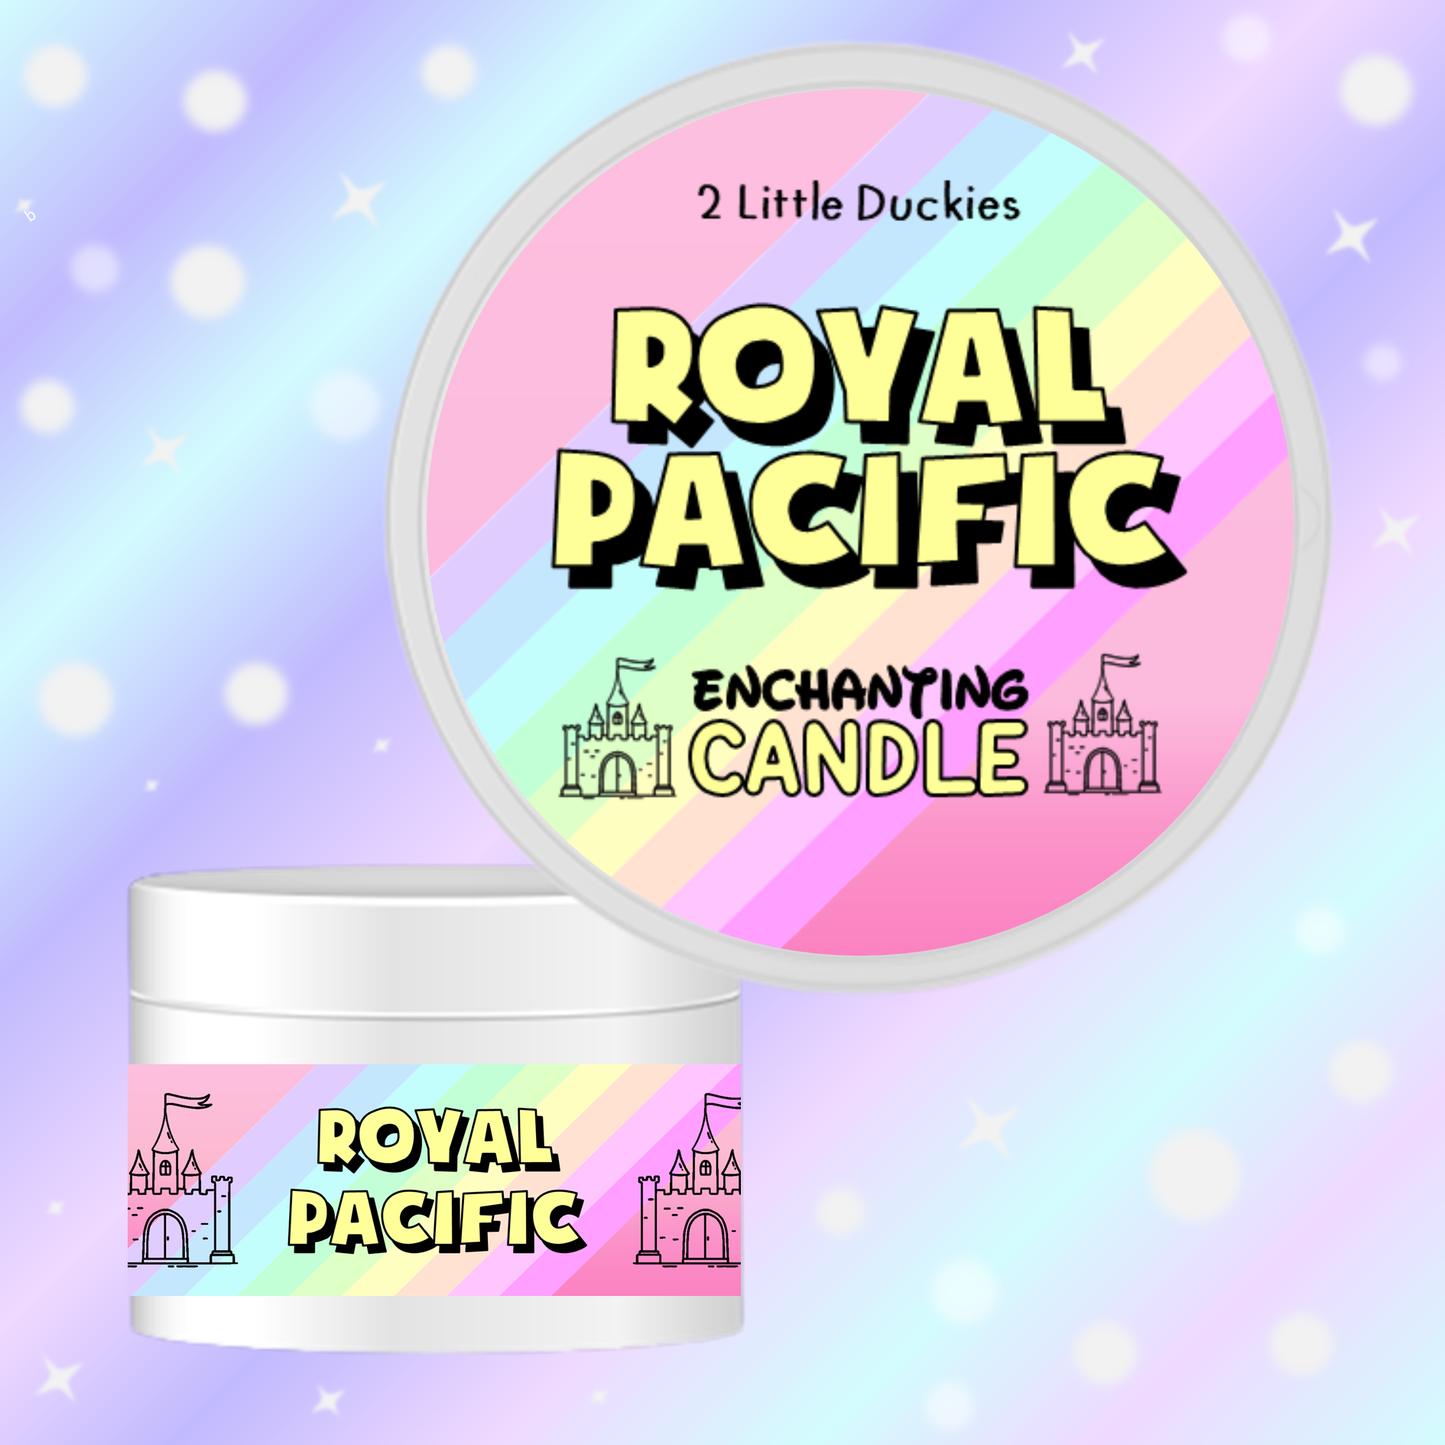 Royal Pacific Candle